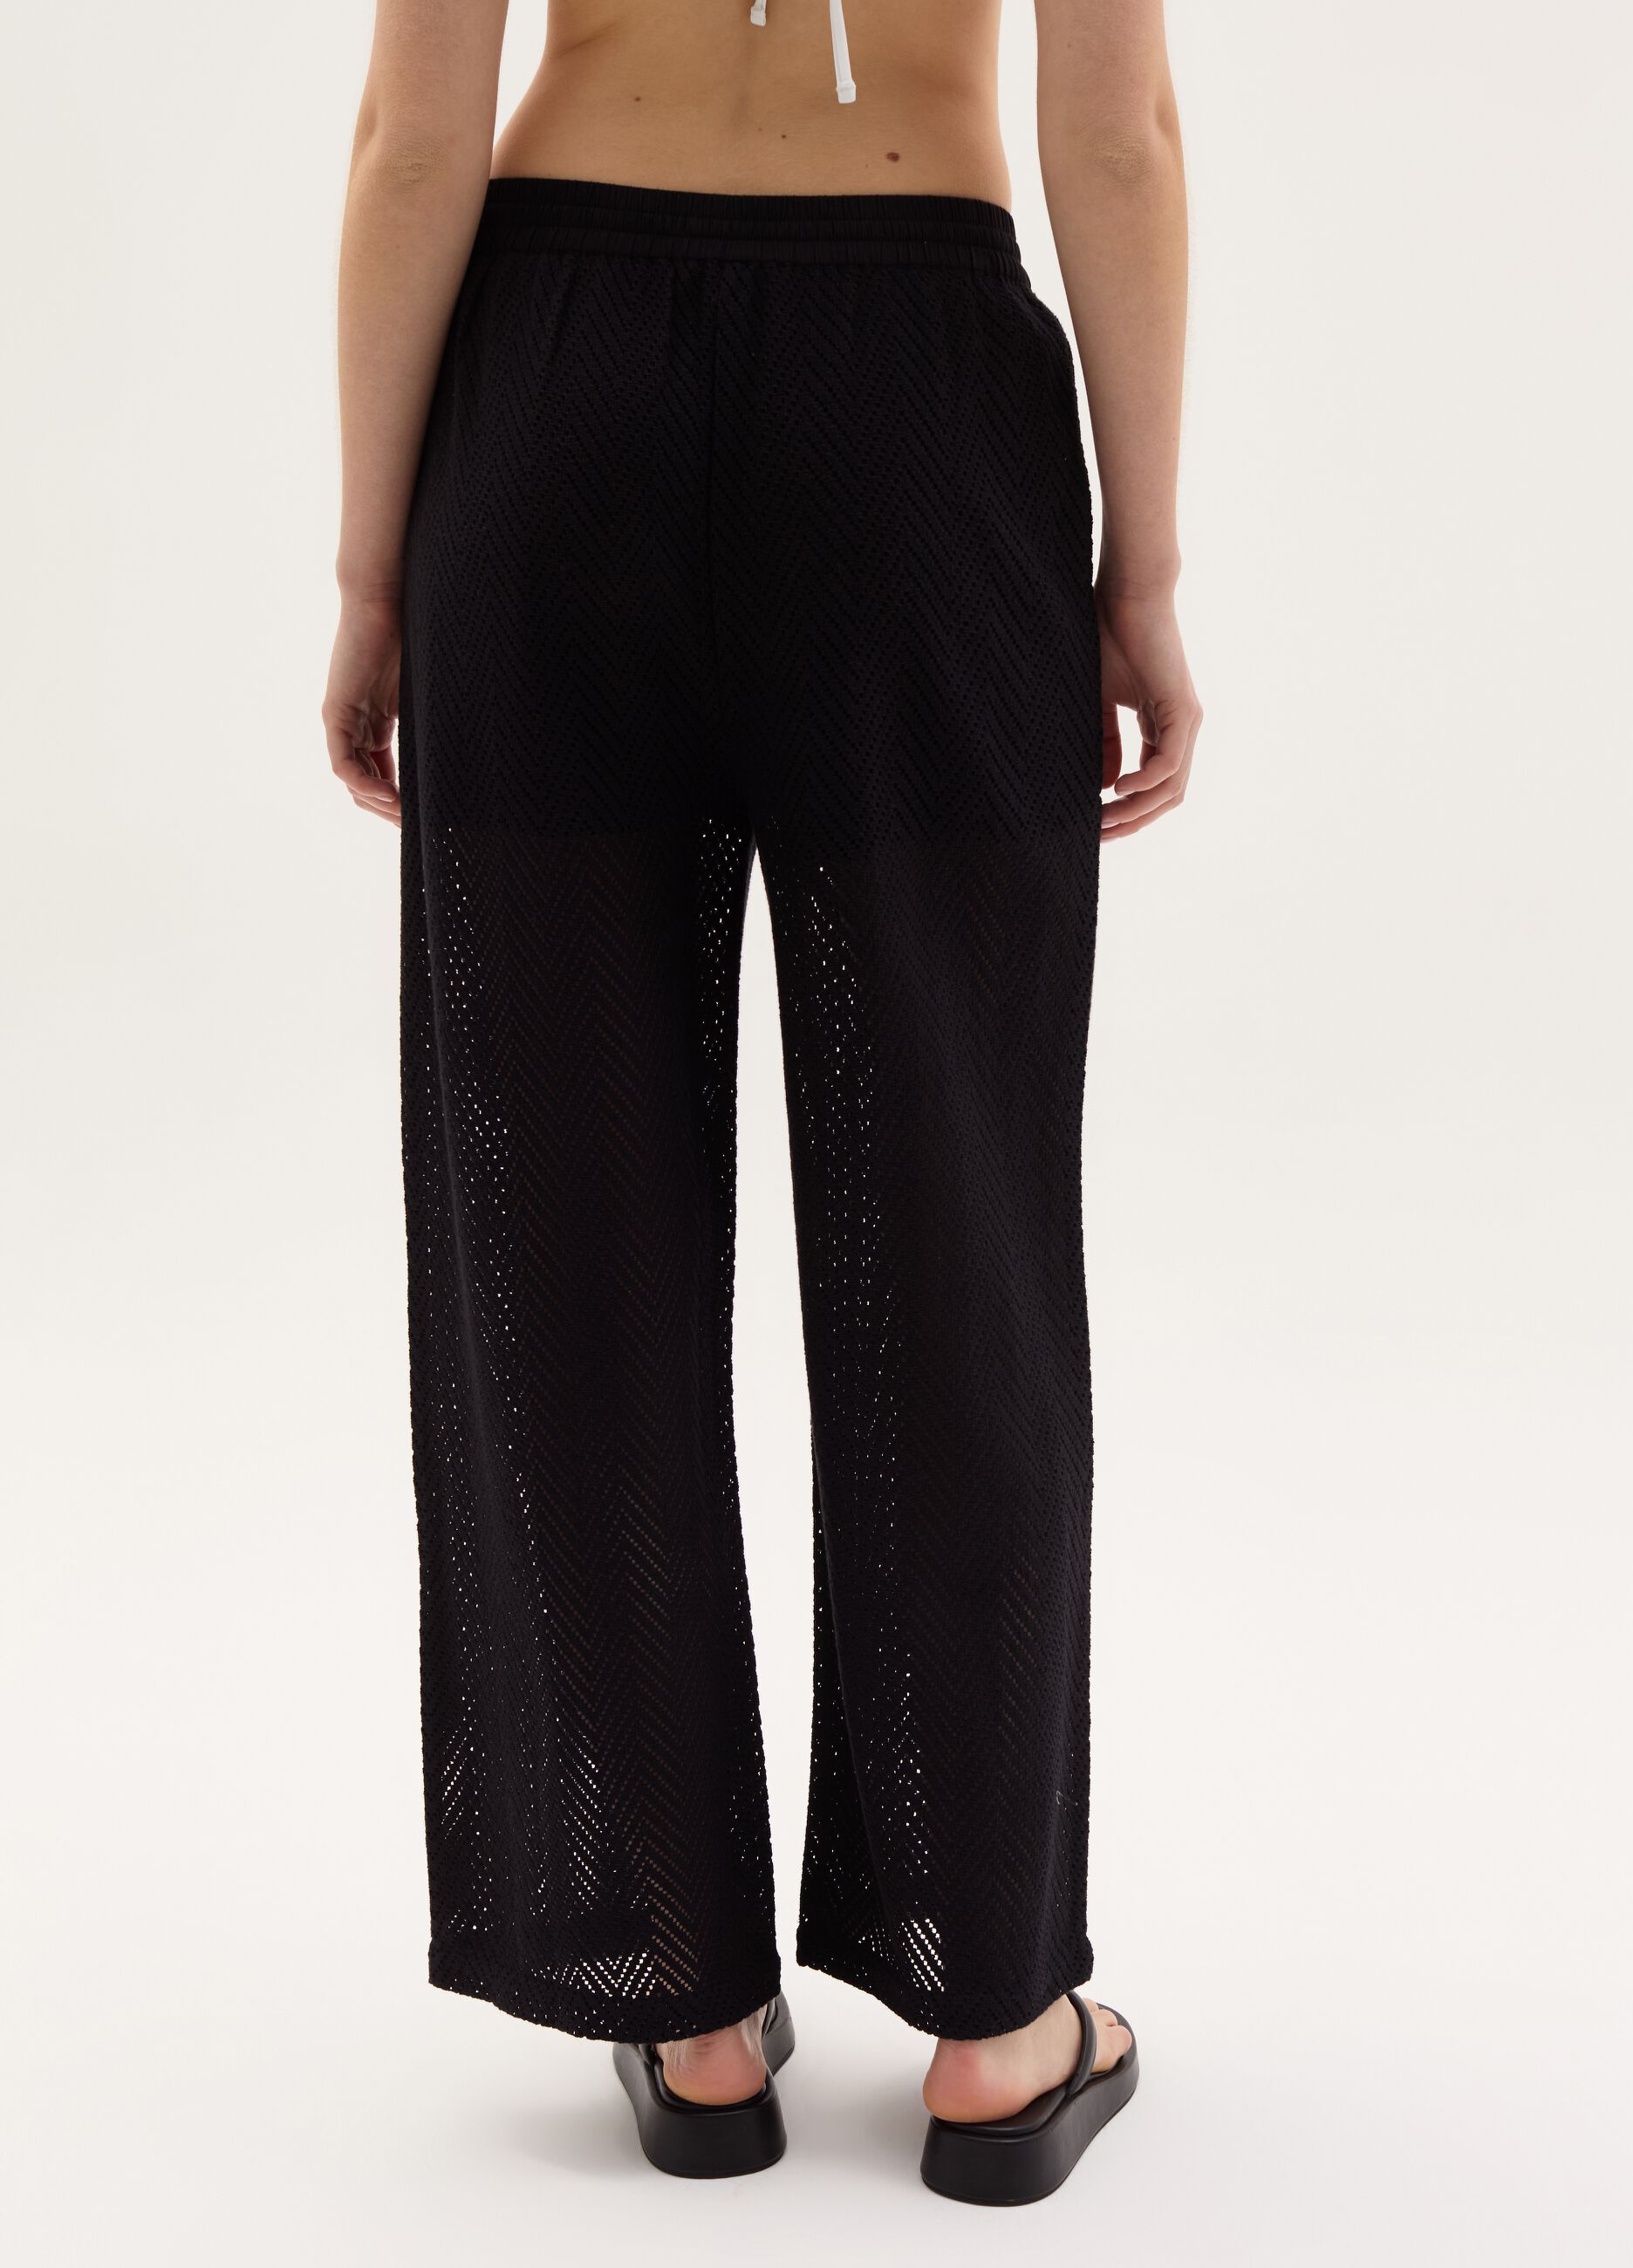 Beach cover-up trousers with openwork